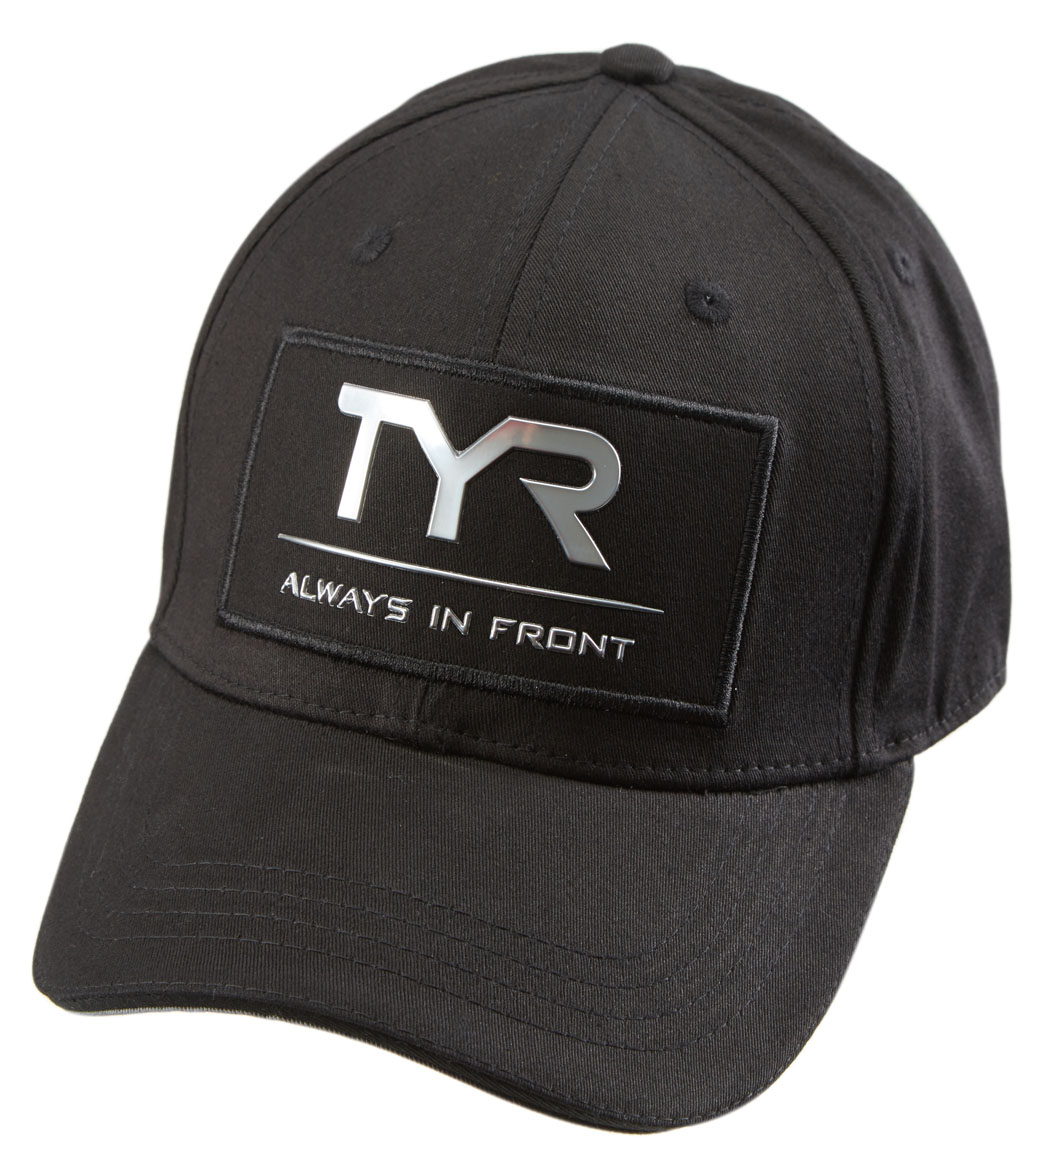 TYR Always In Front Breakout Fitted Cap - Black Small/Medium Cotton/Polyester - Swimoutlet.com